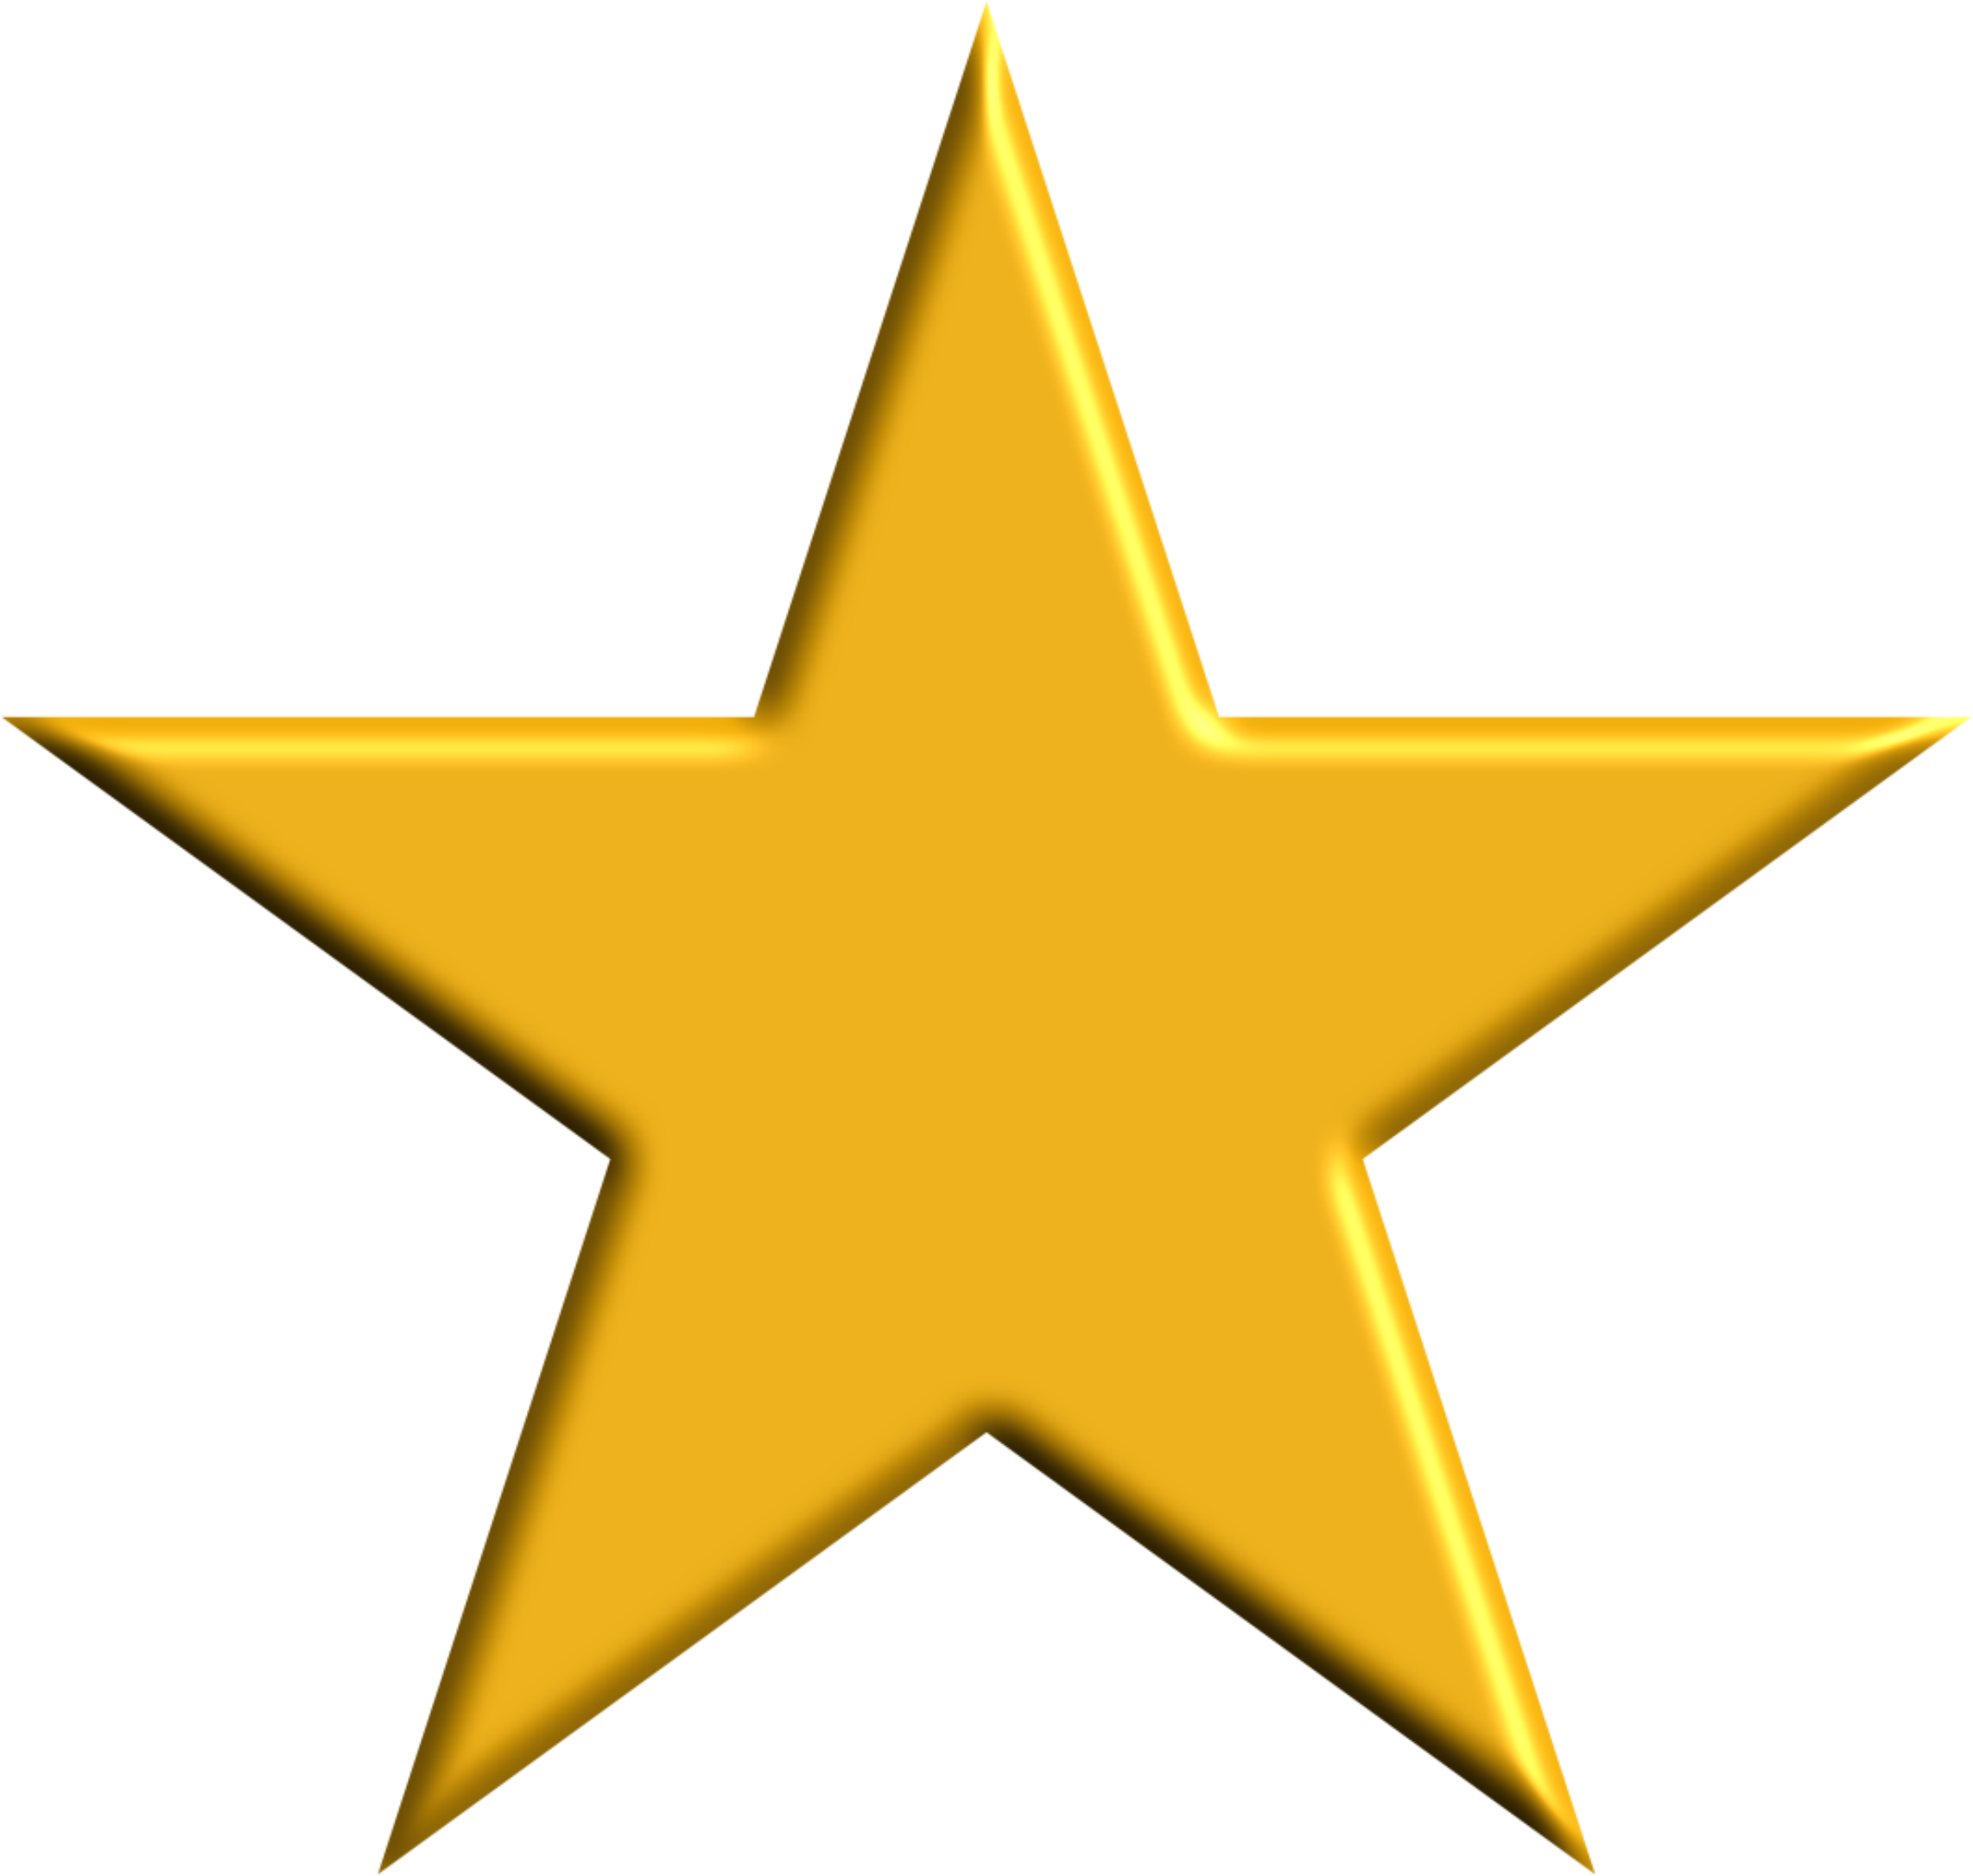 Clipart Gold Star Rh Openclipart Org Gold Star Clip - Orange Star Png (2284x2172)